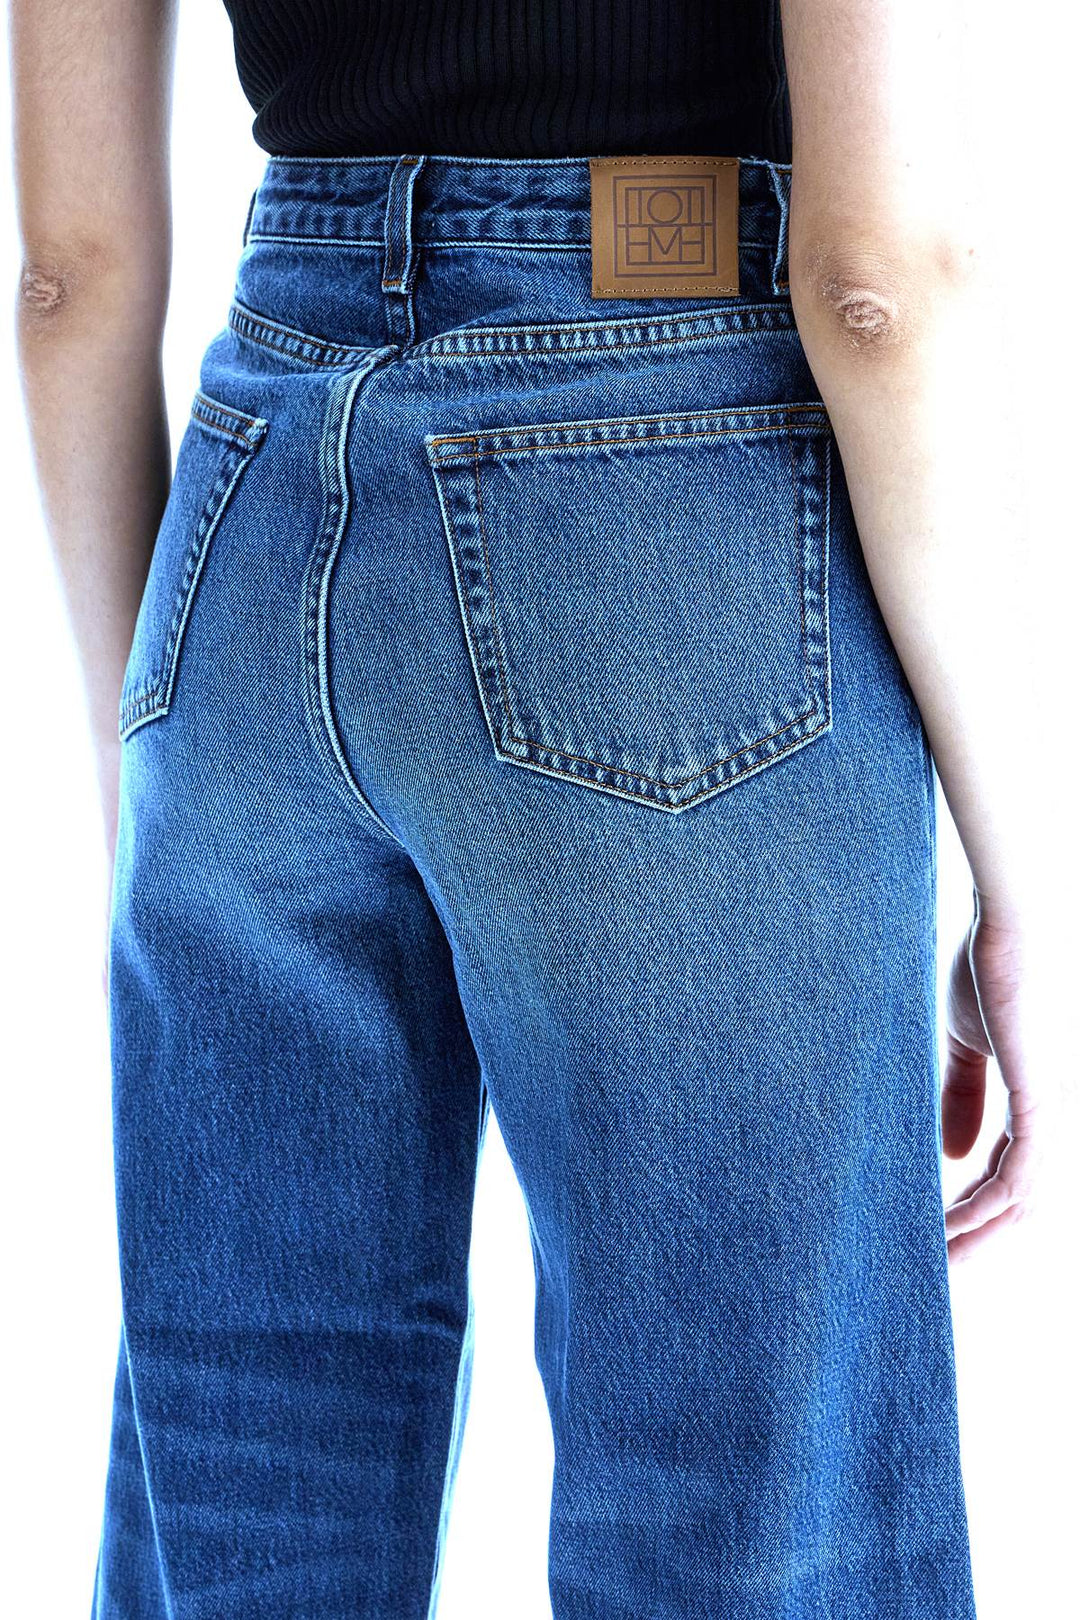 Toteme Cropped Flare Jeans   Blue